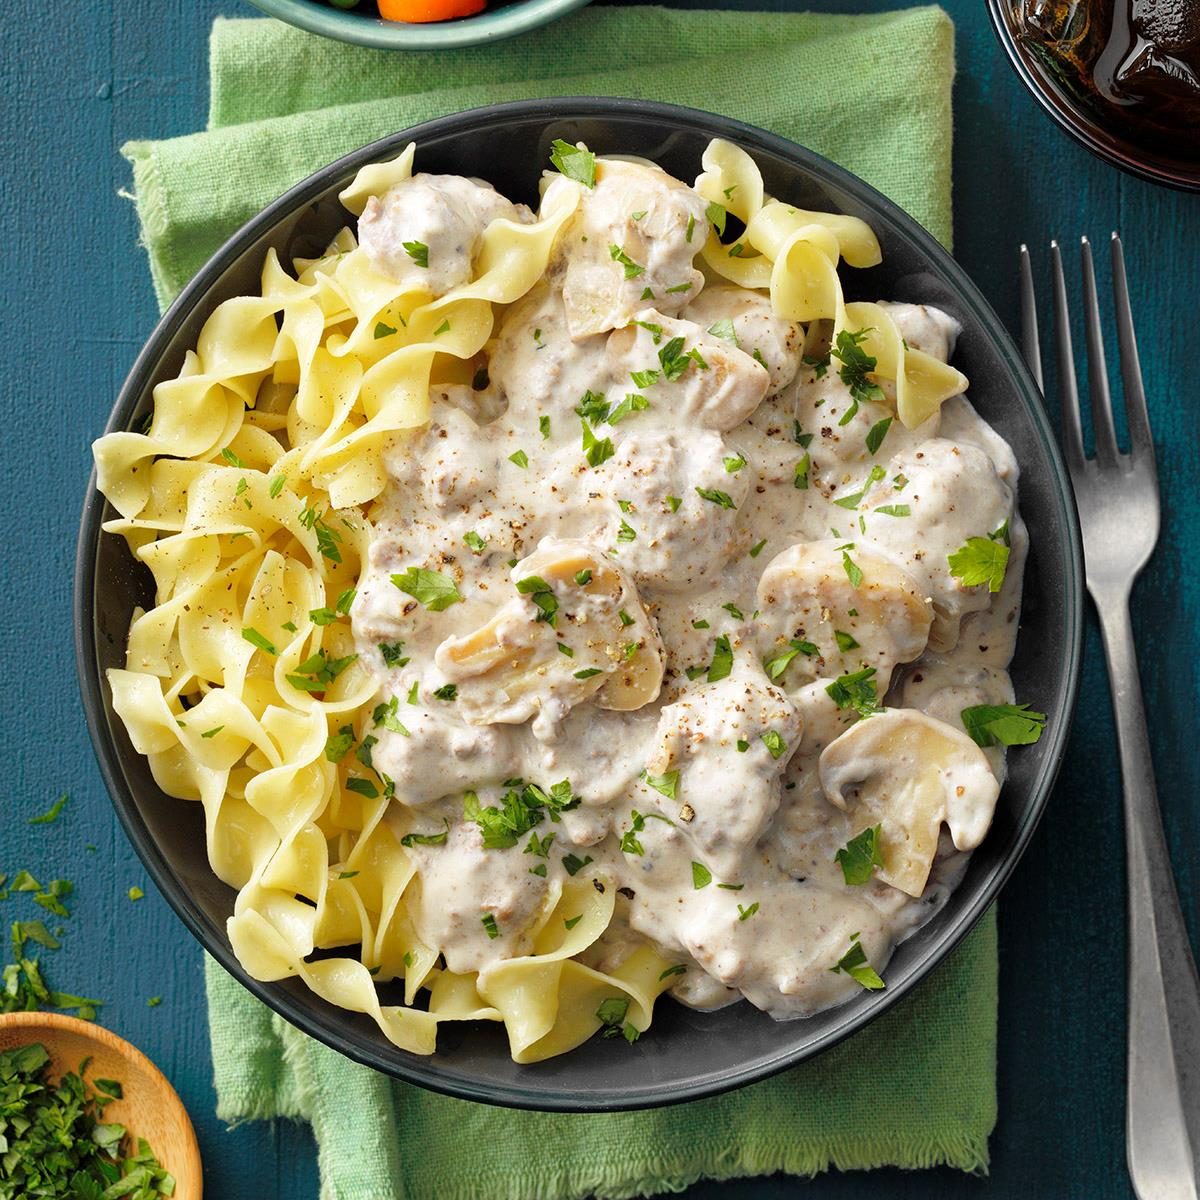 <p>This easy ground beef stroganoff makes a quick weeknight dinner. I like to serve it with a side salad for a complete meal. —Deb Helmer, Lynden, Washington</p> <div class="listicle-page__buttons"> <div class="listicle-page__cta-button"><a href='https://www.tasteofhome.com/recipes/hamburger-stroganoff/'>Go to Recipe</a></div> </div>